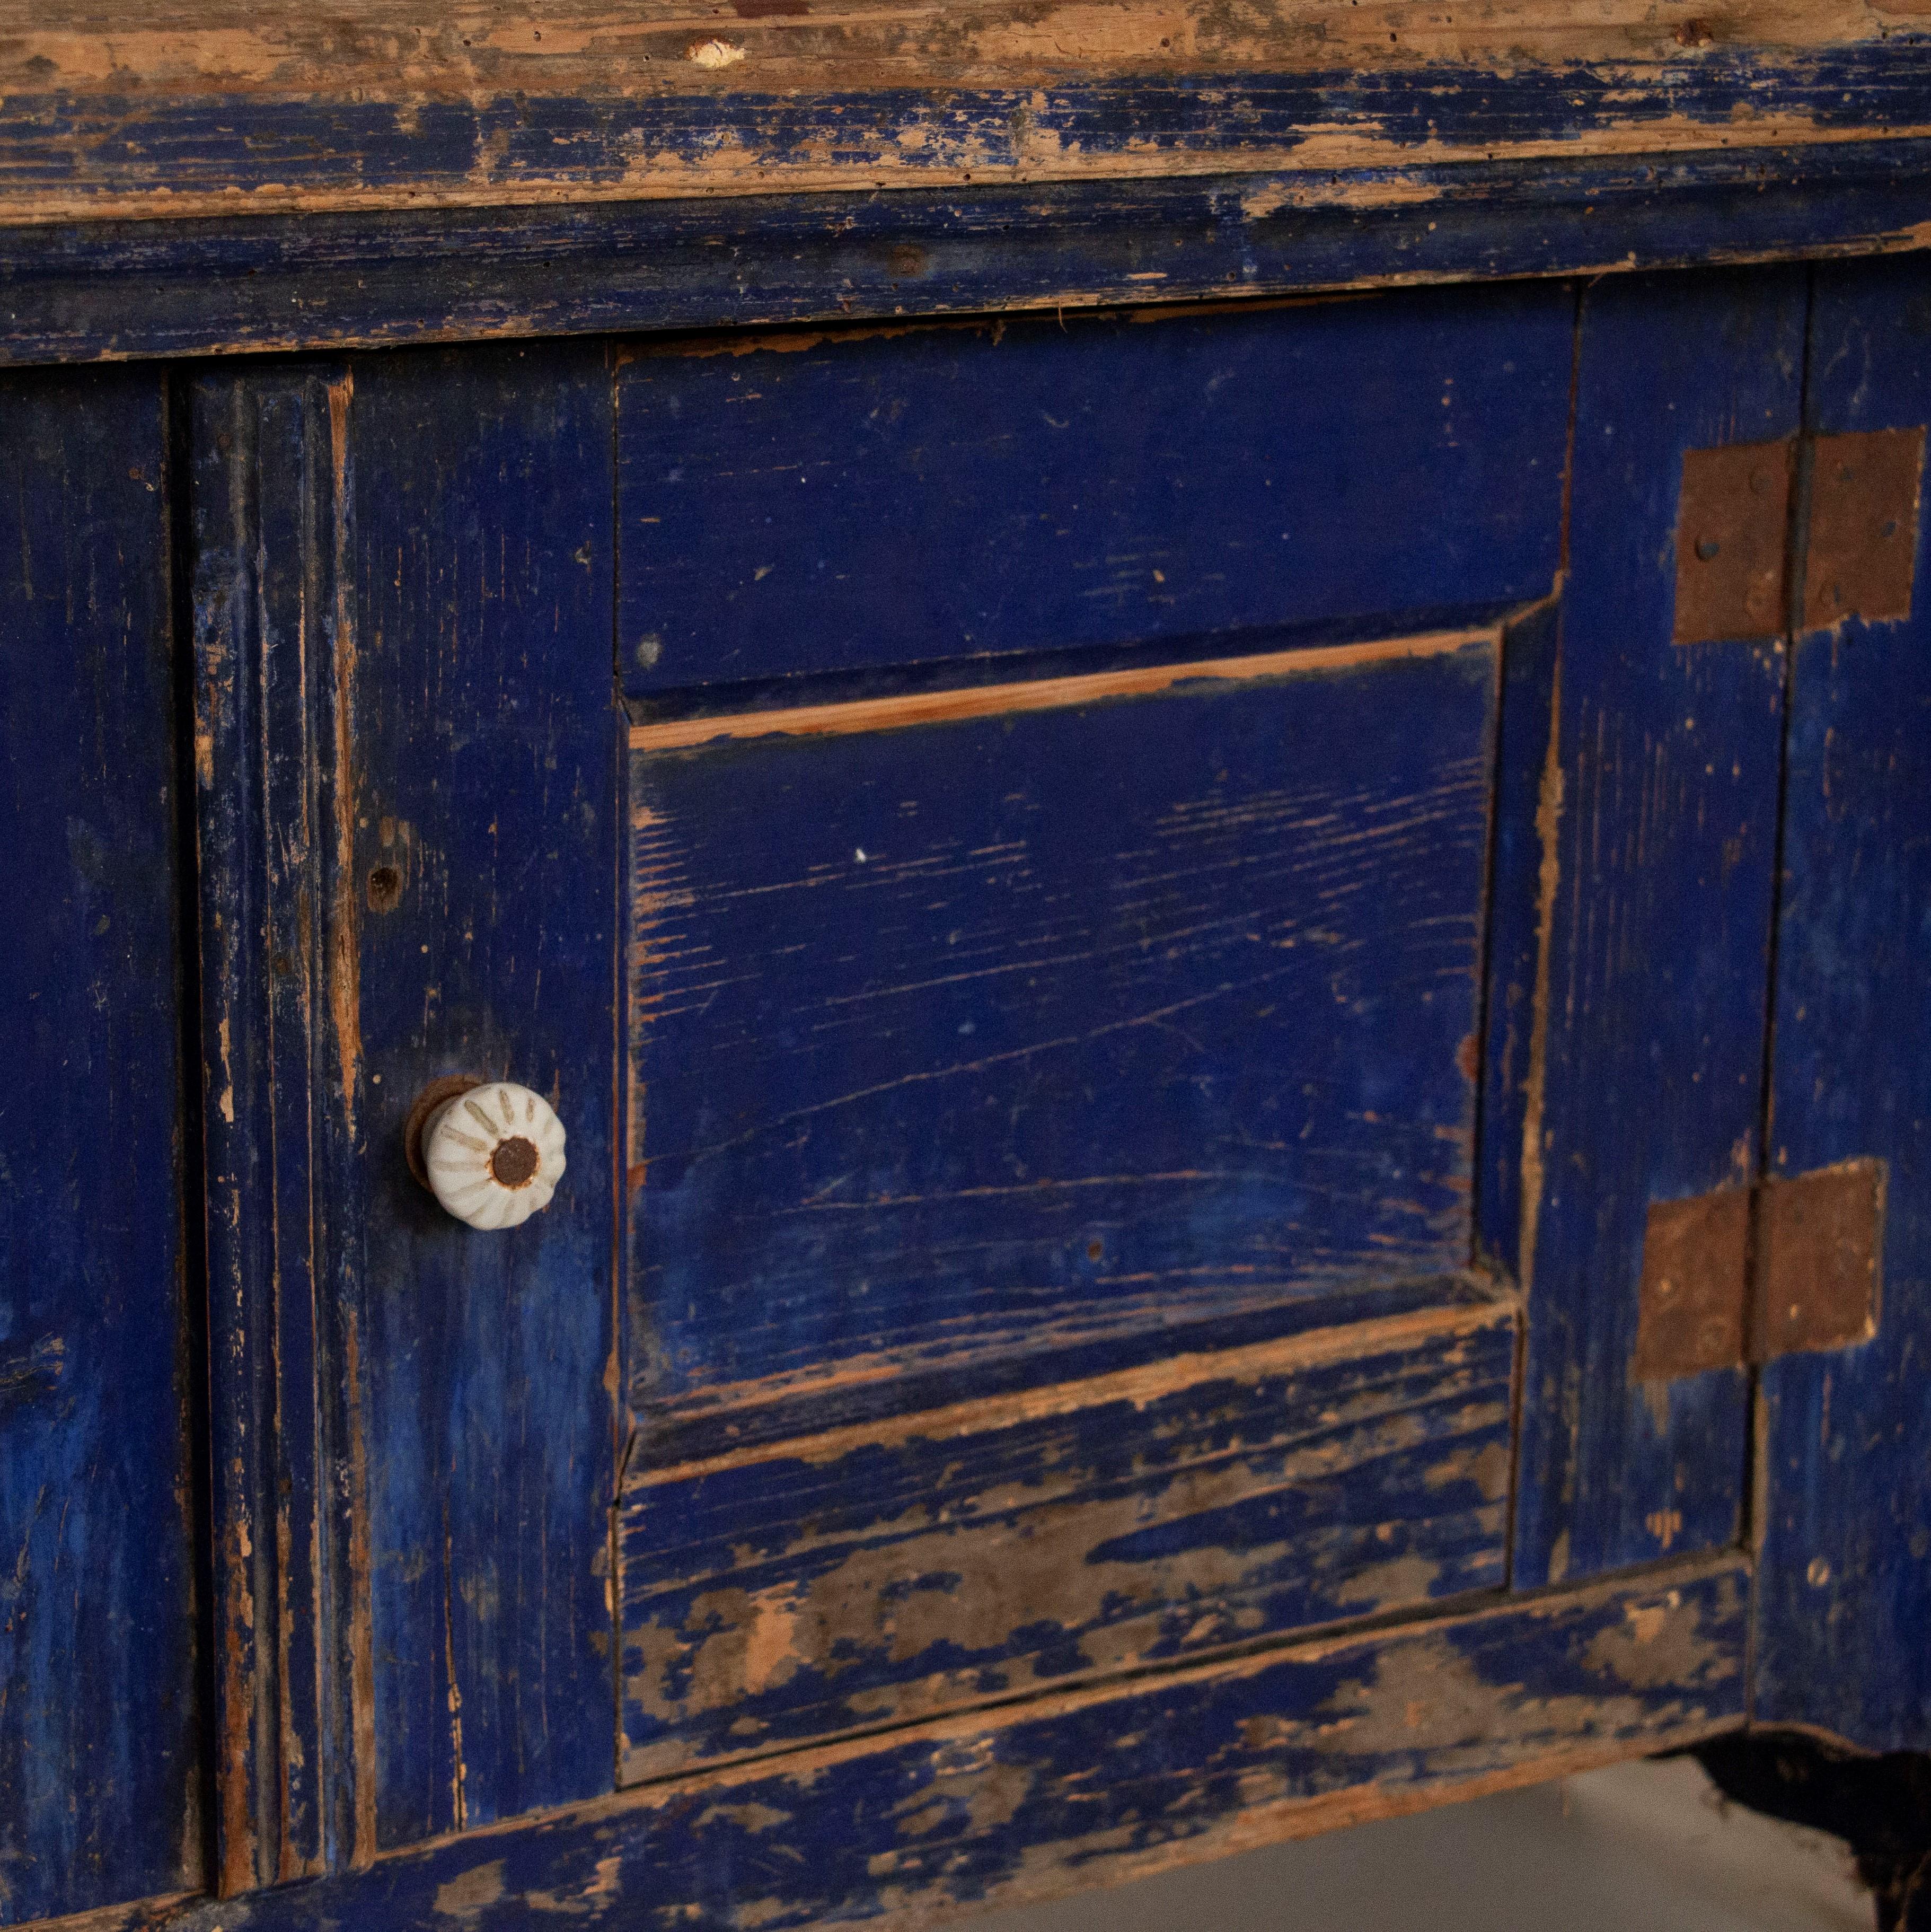 The eye-catching cobalt blue paint is all original in this long bench. While pine benches were a traditional element in country homes and farmhouses of Europe, this one is a special find due to the unique lower cabinet that create easy storage.